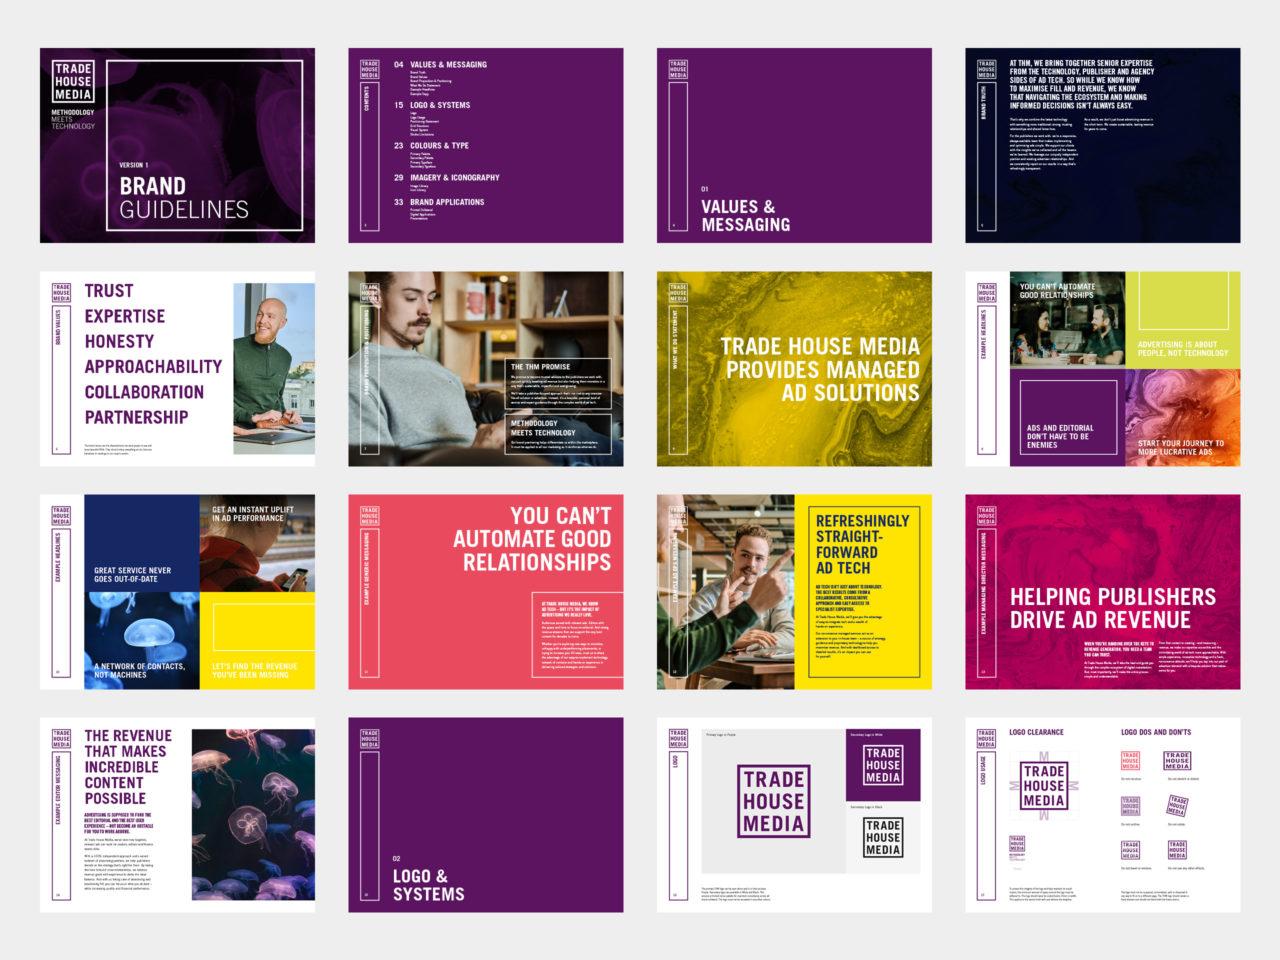 An image to show pages from the THM brand guidelines.